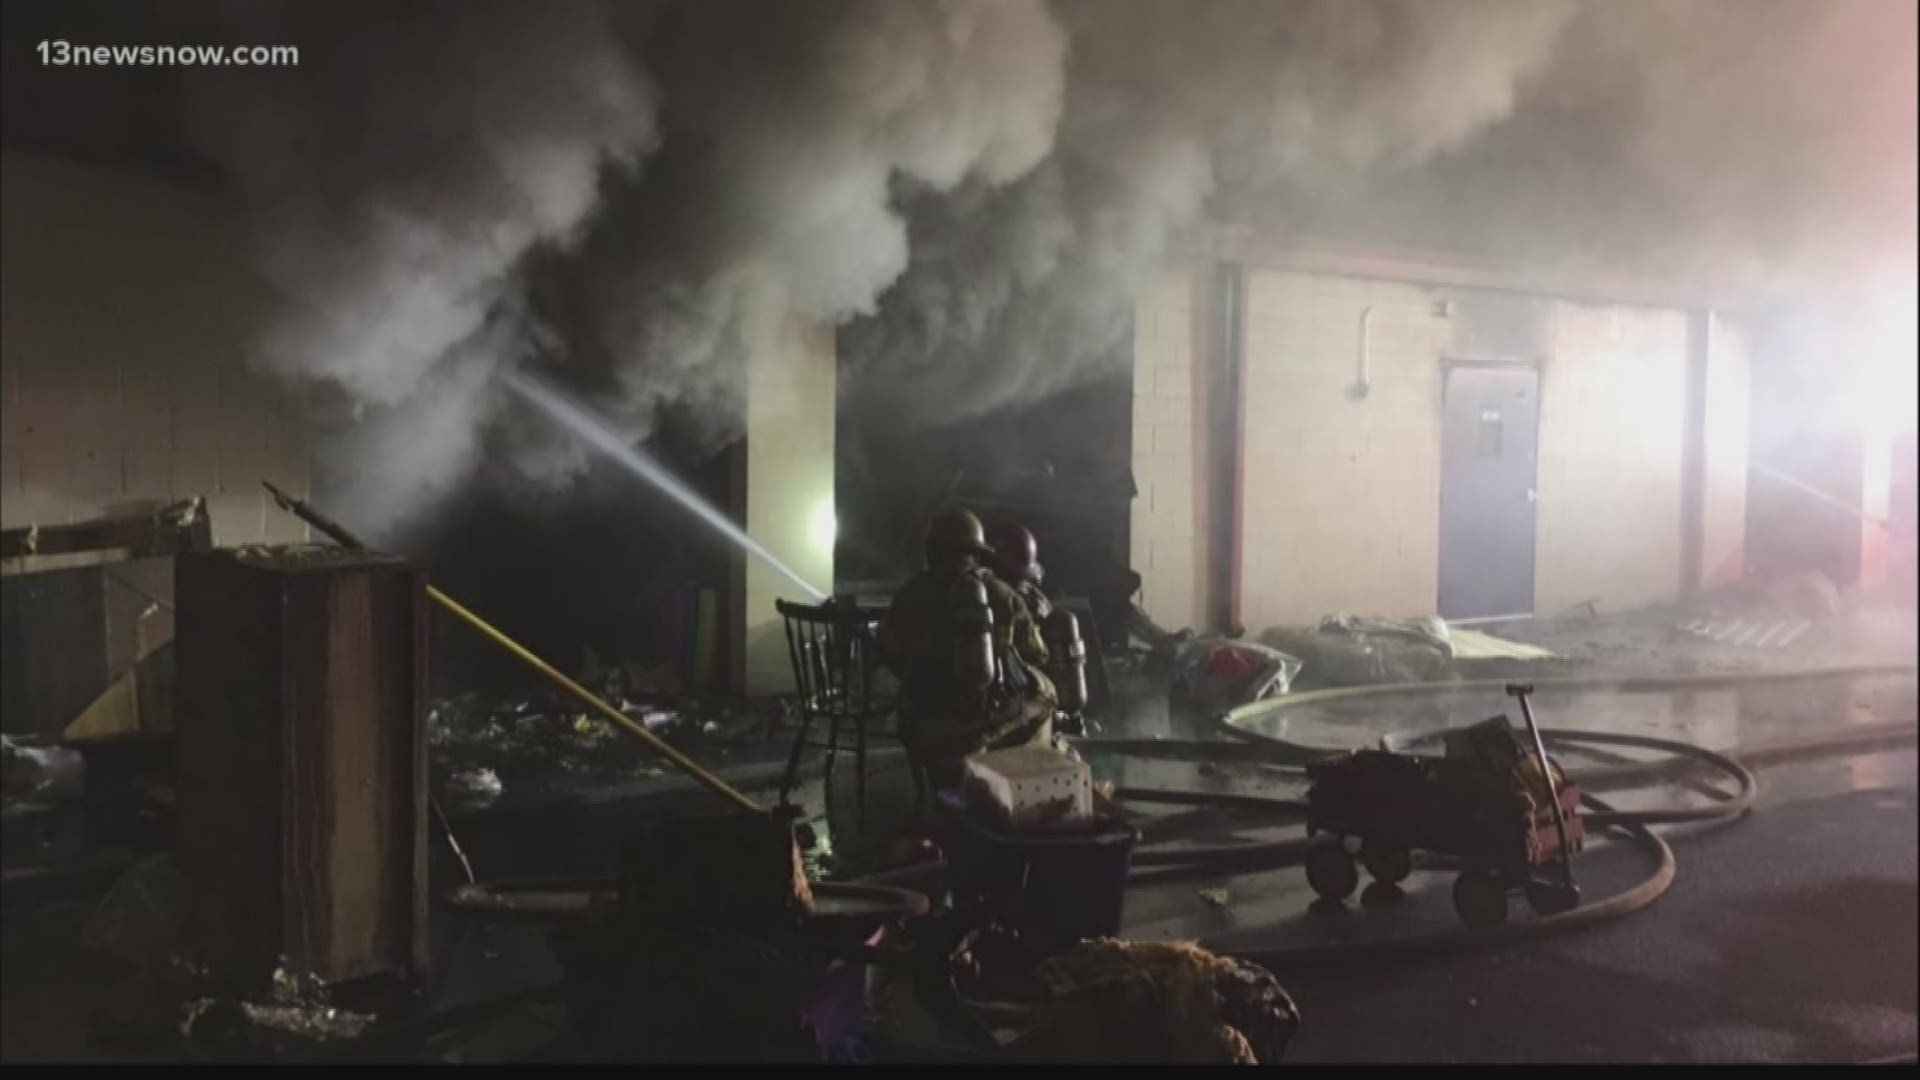 Chesapeake firefighter injured while fighting structure fire at storage facility.